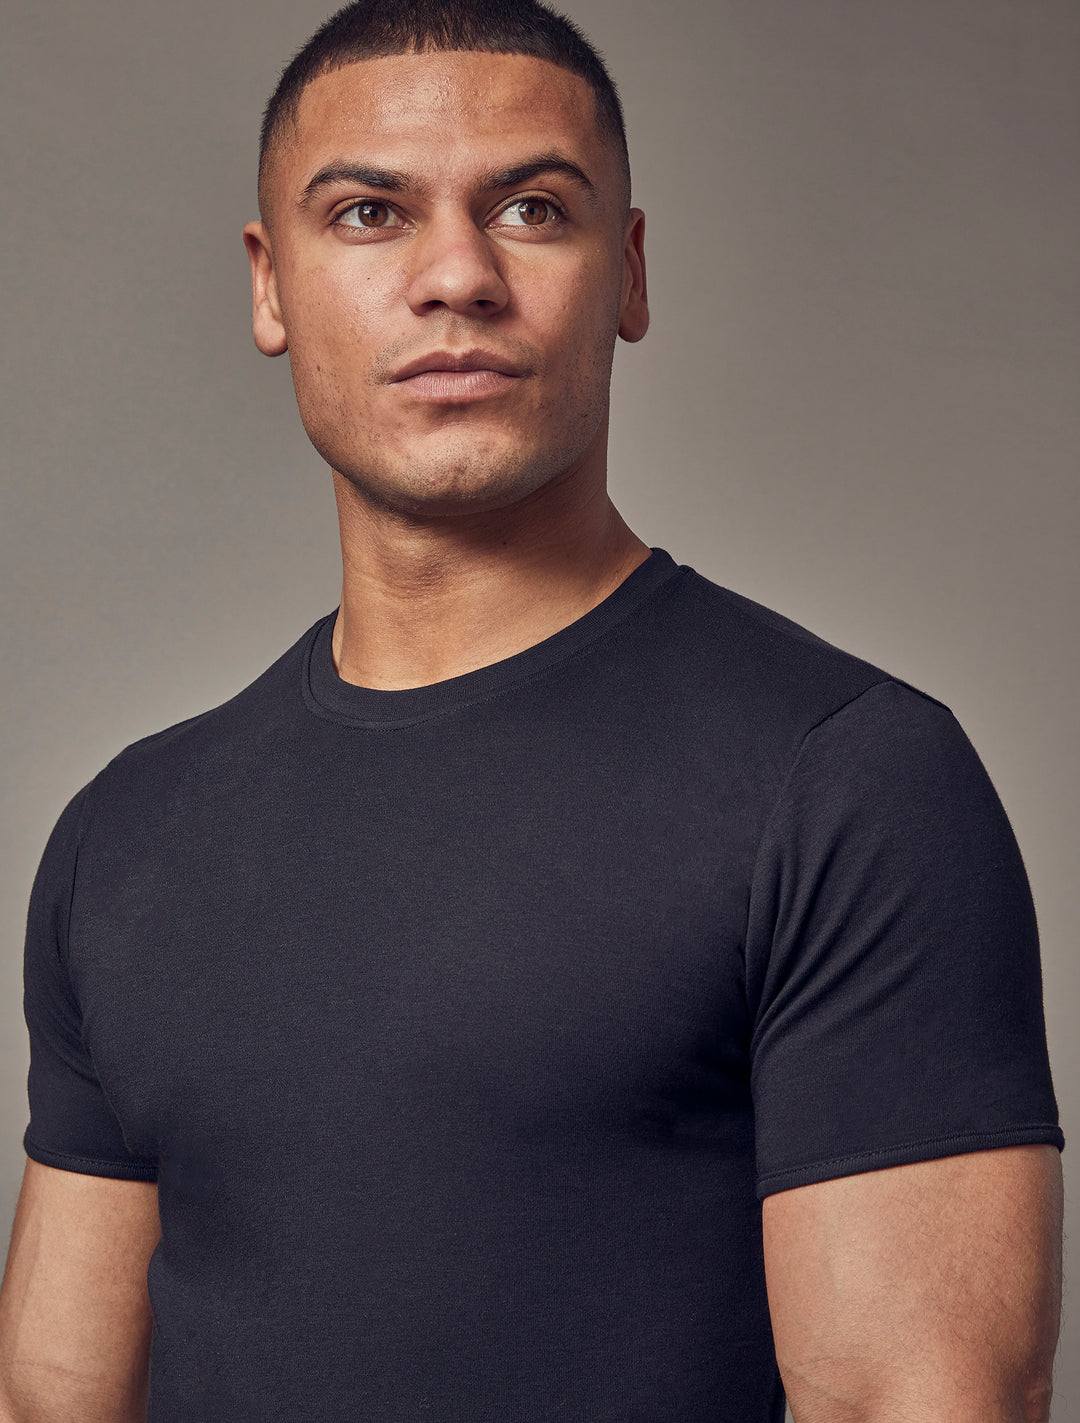 Black Tapered Fit T-Shirt - Muscle Fitted T Shirts